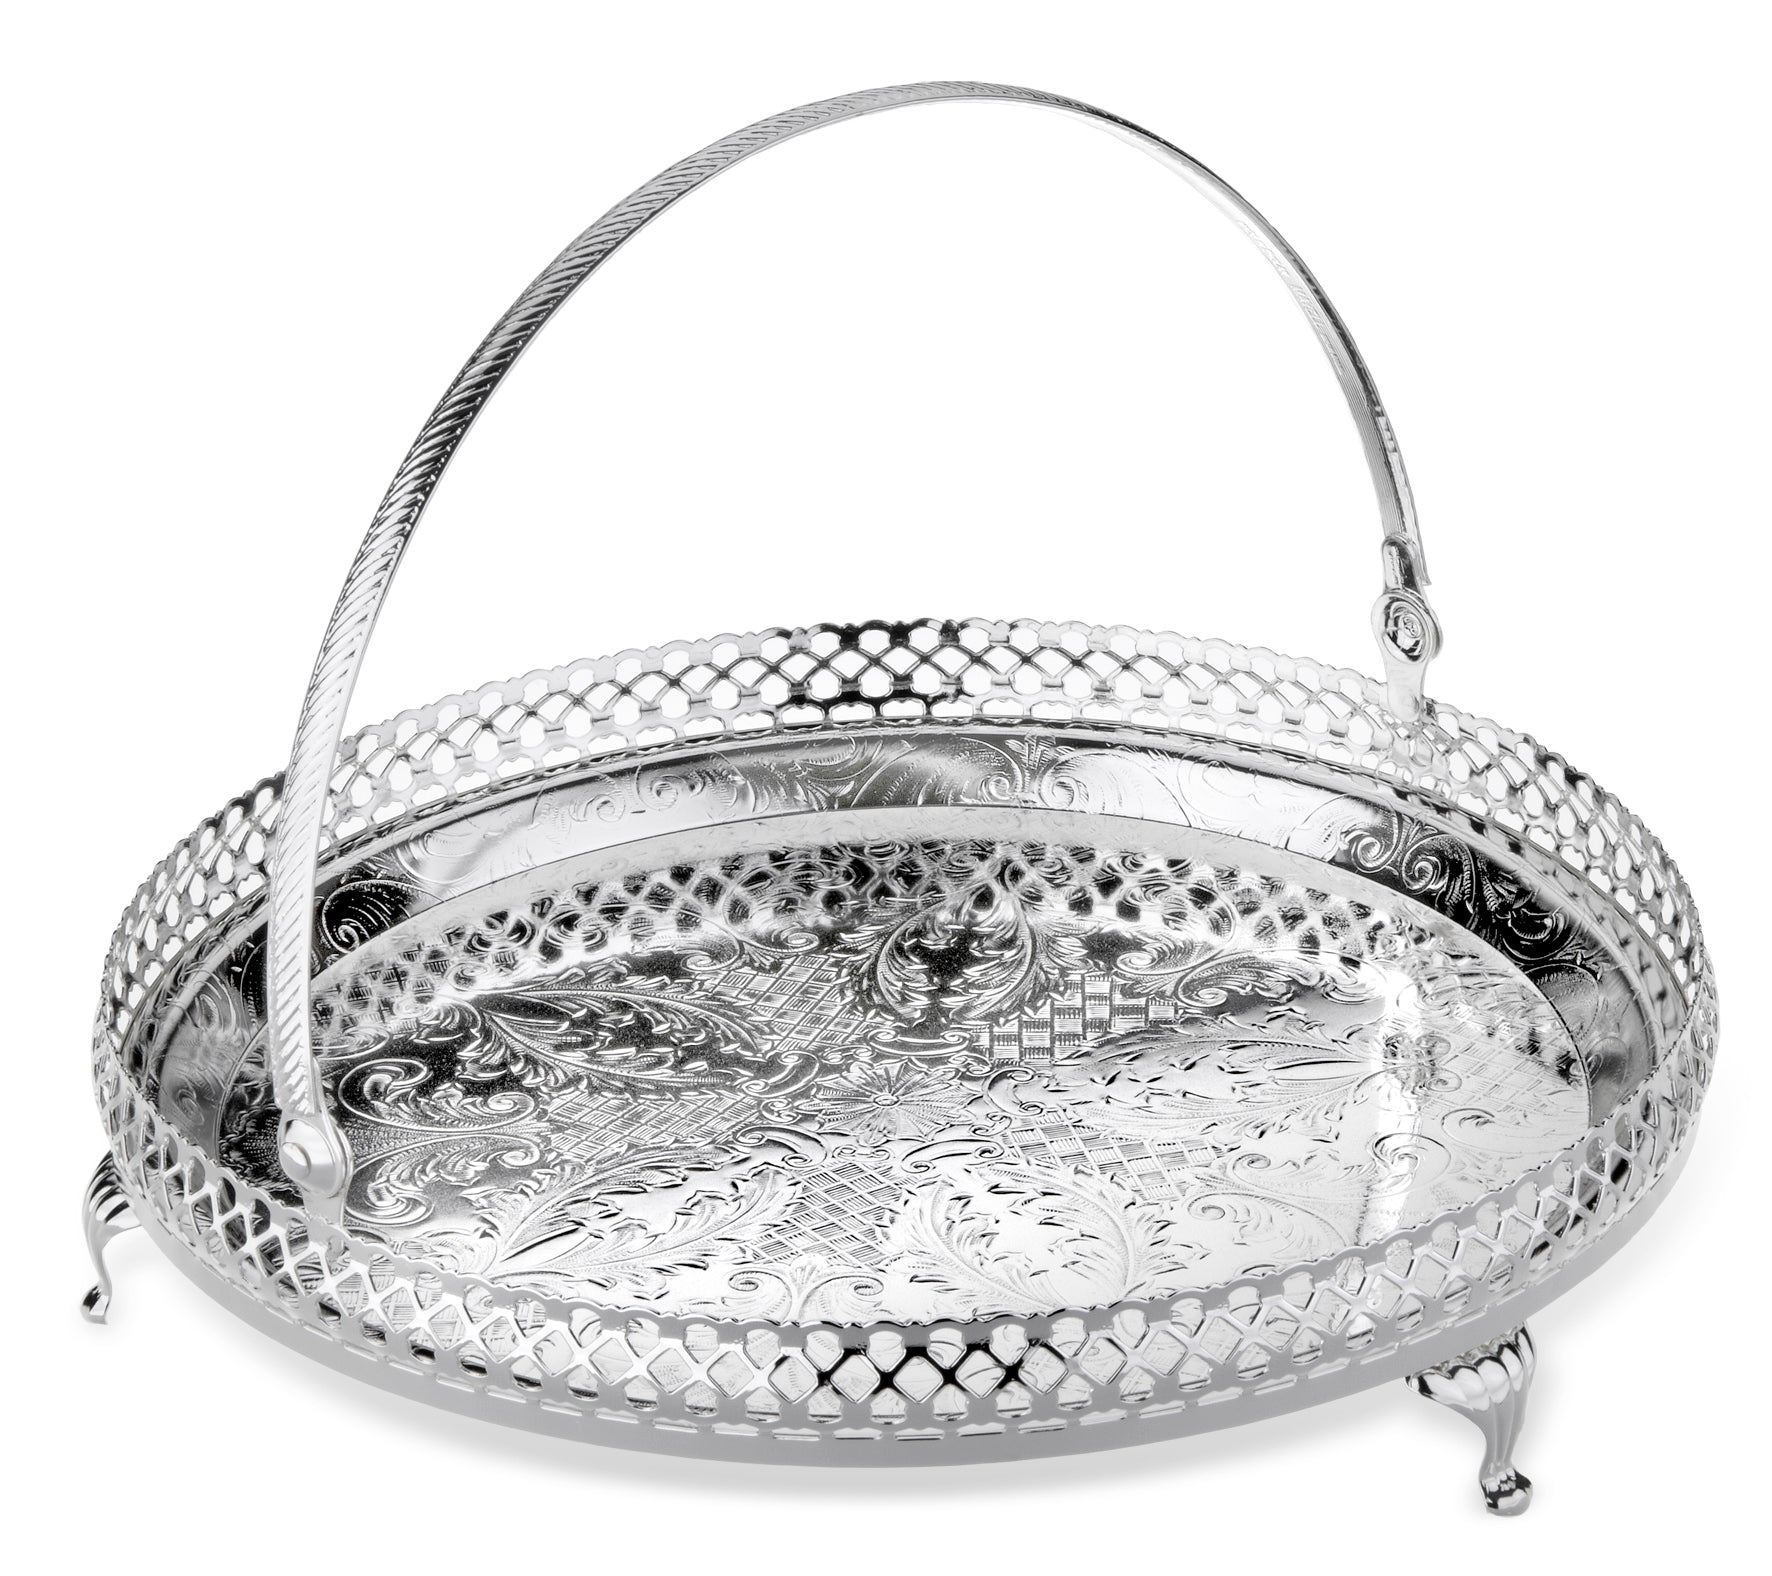 Queen Anne Round Tray with Legs & Swing Handle -23 Dia cm -Silver Plated